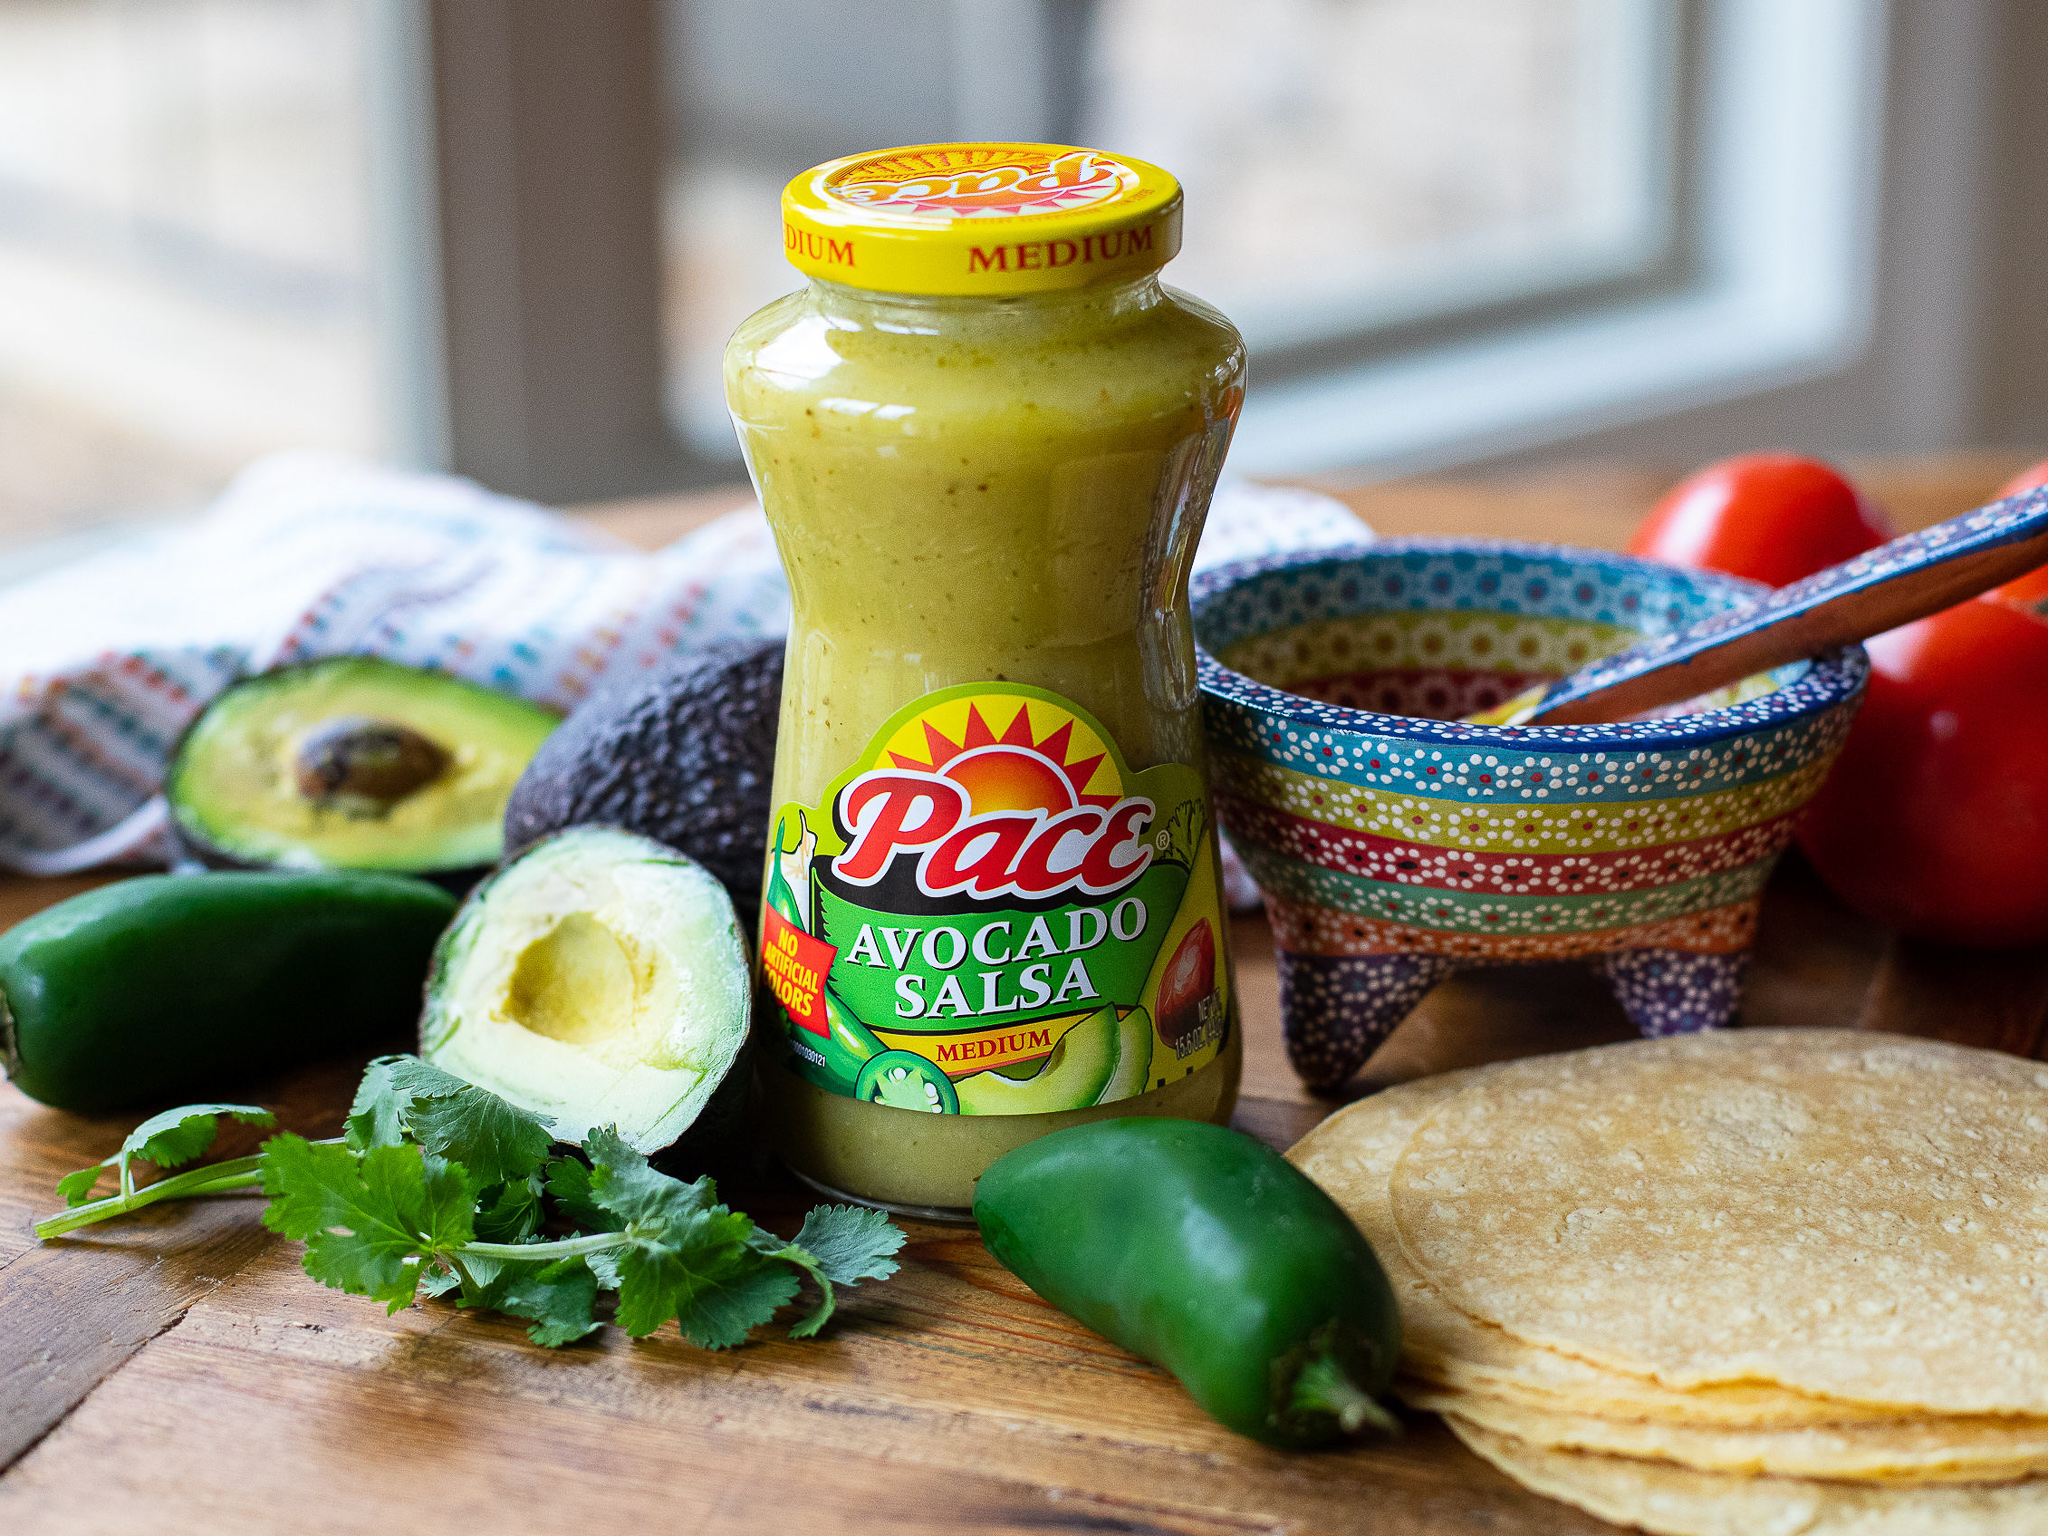 Great Deals On Pace Picante & Salsa – As Low As $1.54 At Publix